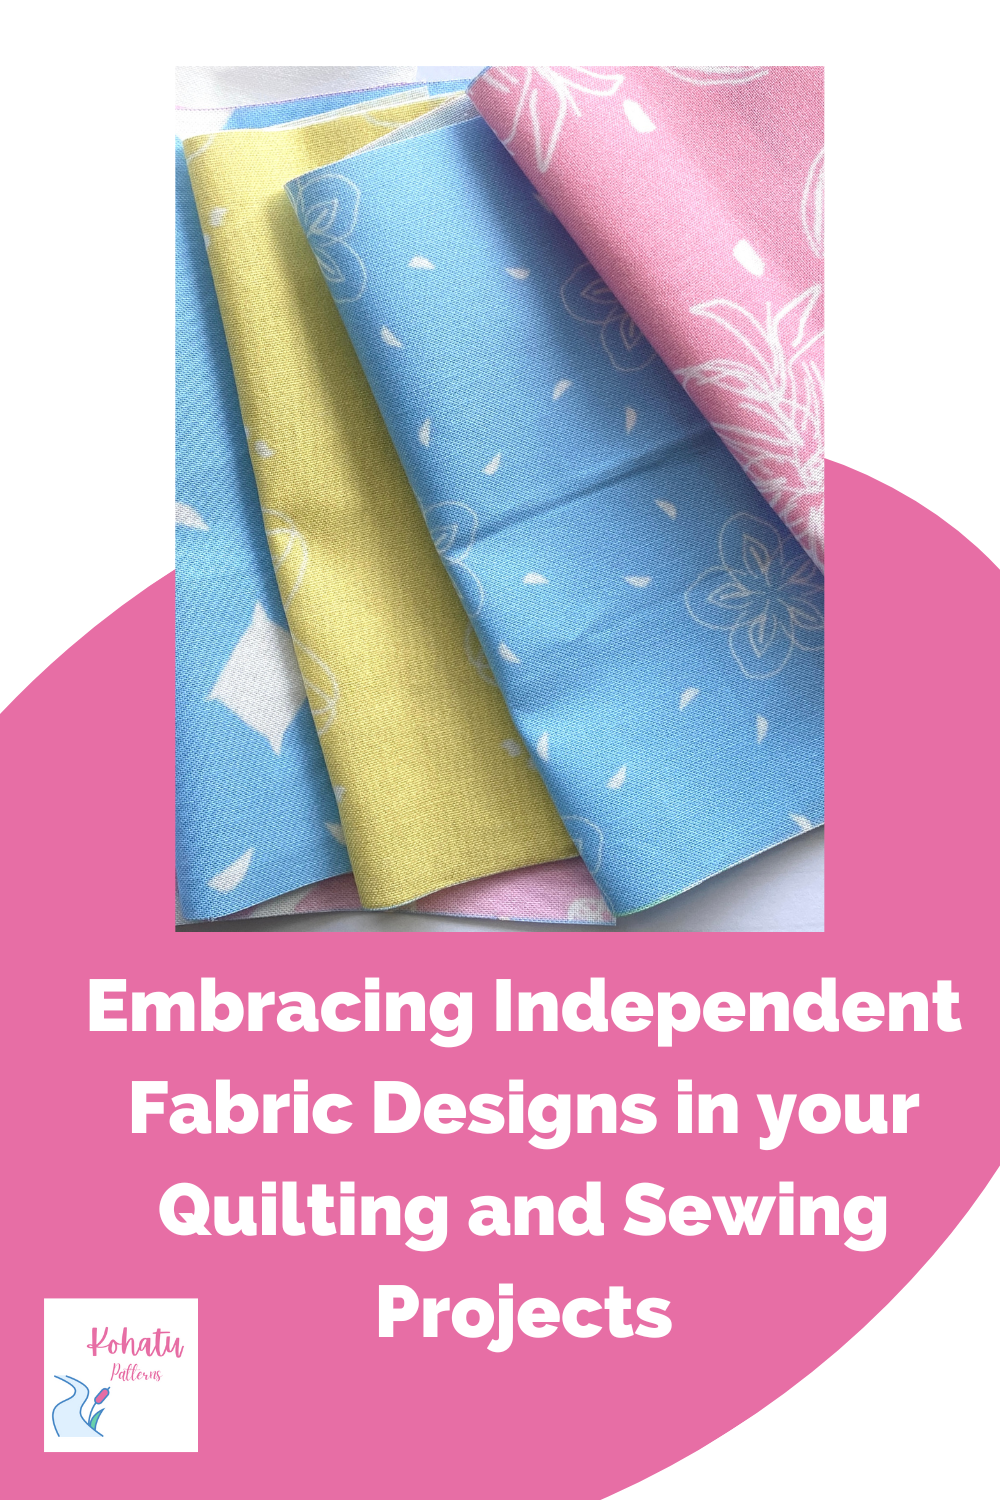 This blog post discusses the merits of supporting independent fabric designers on platforms like Spoonflower over fabrics from the big box fabric stores.